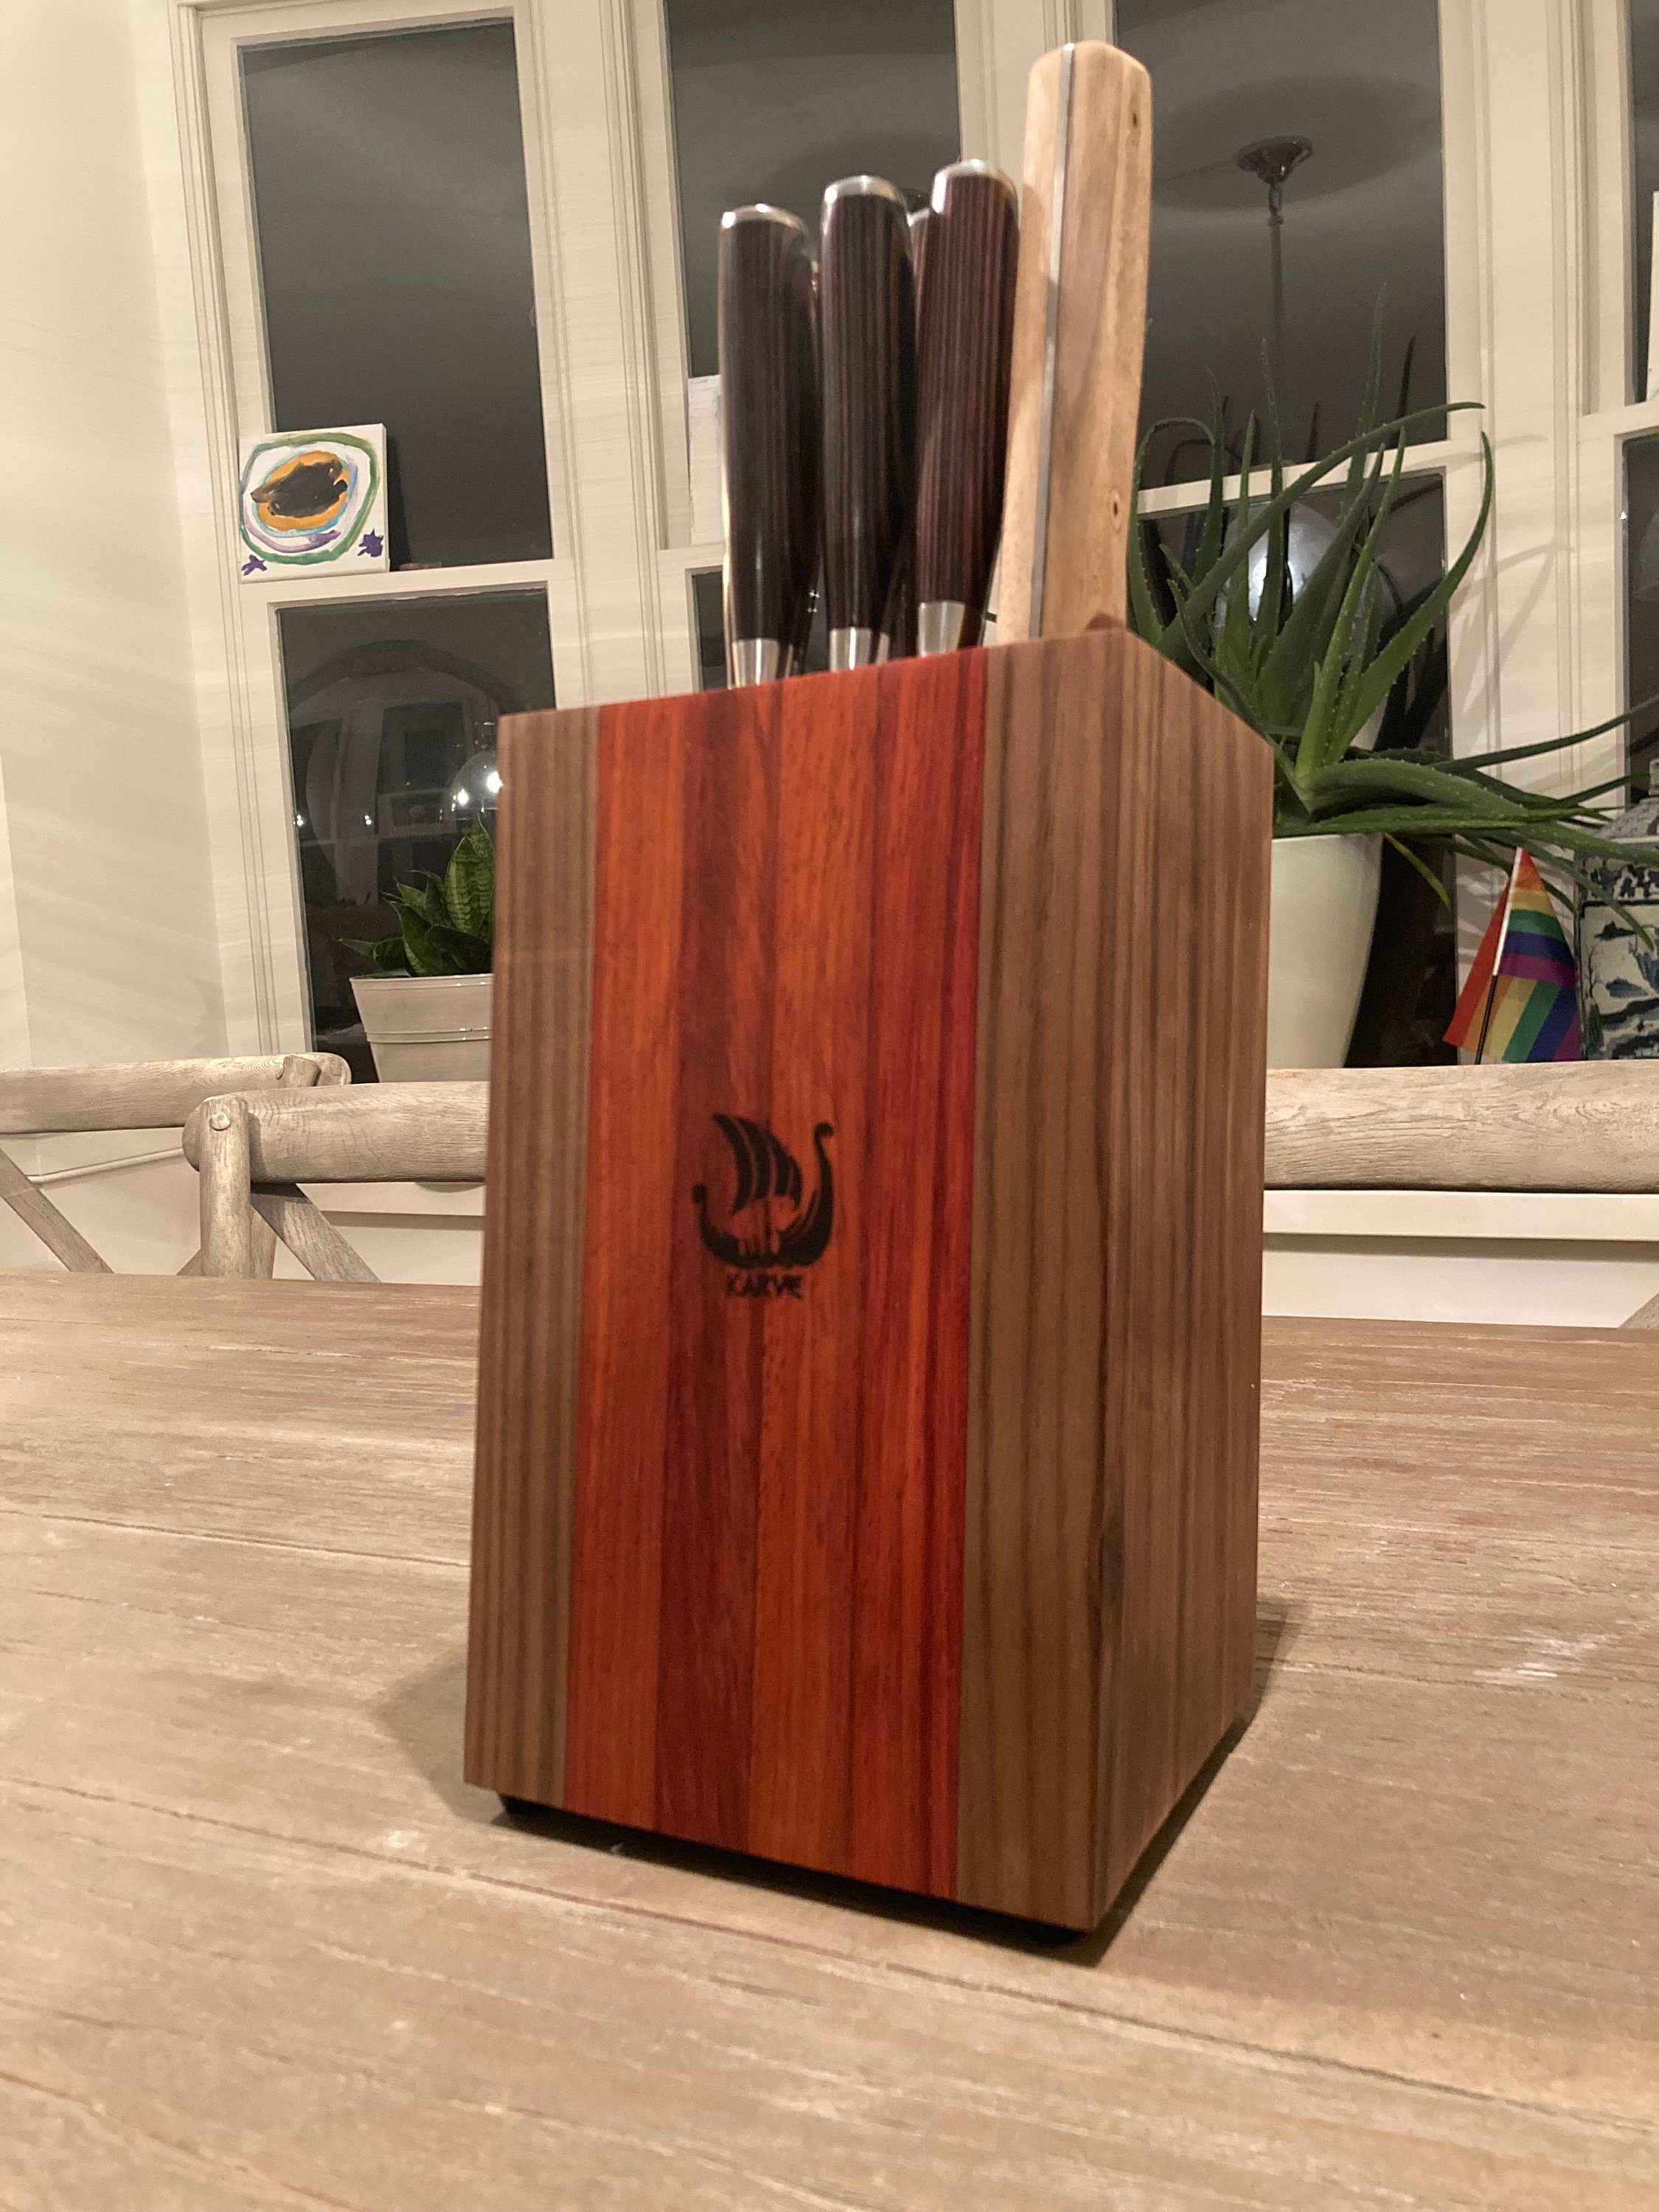 Red Core Knife Block 